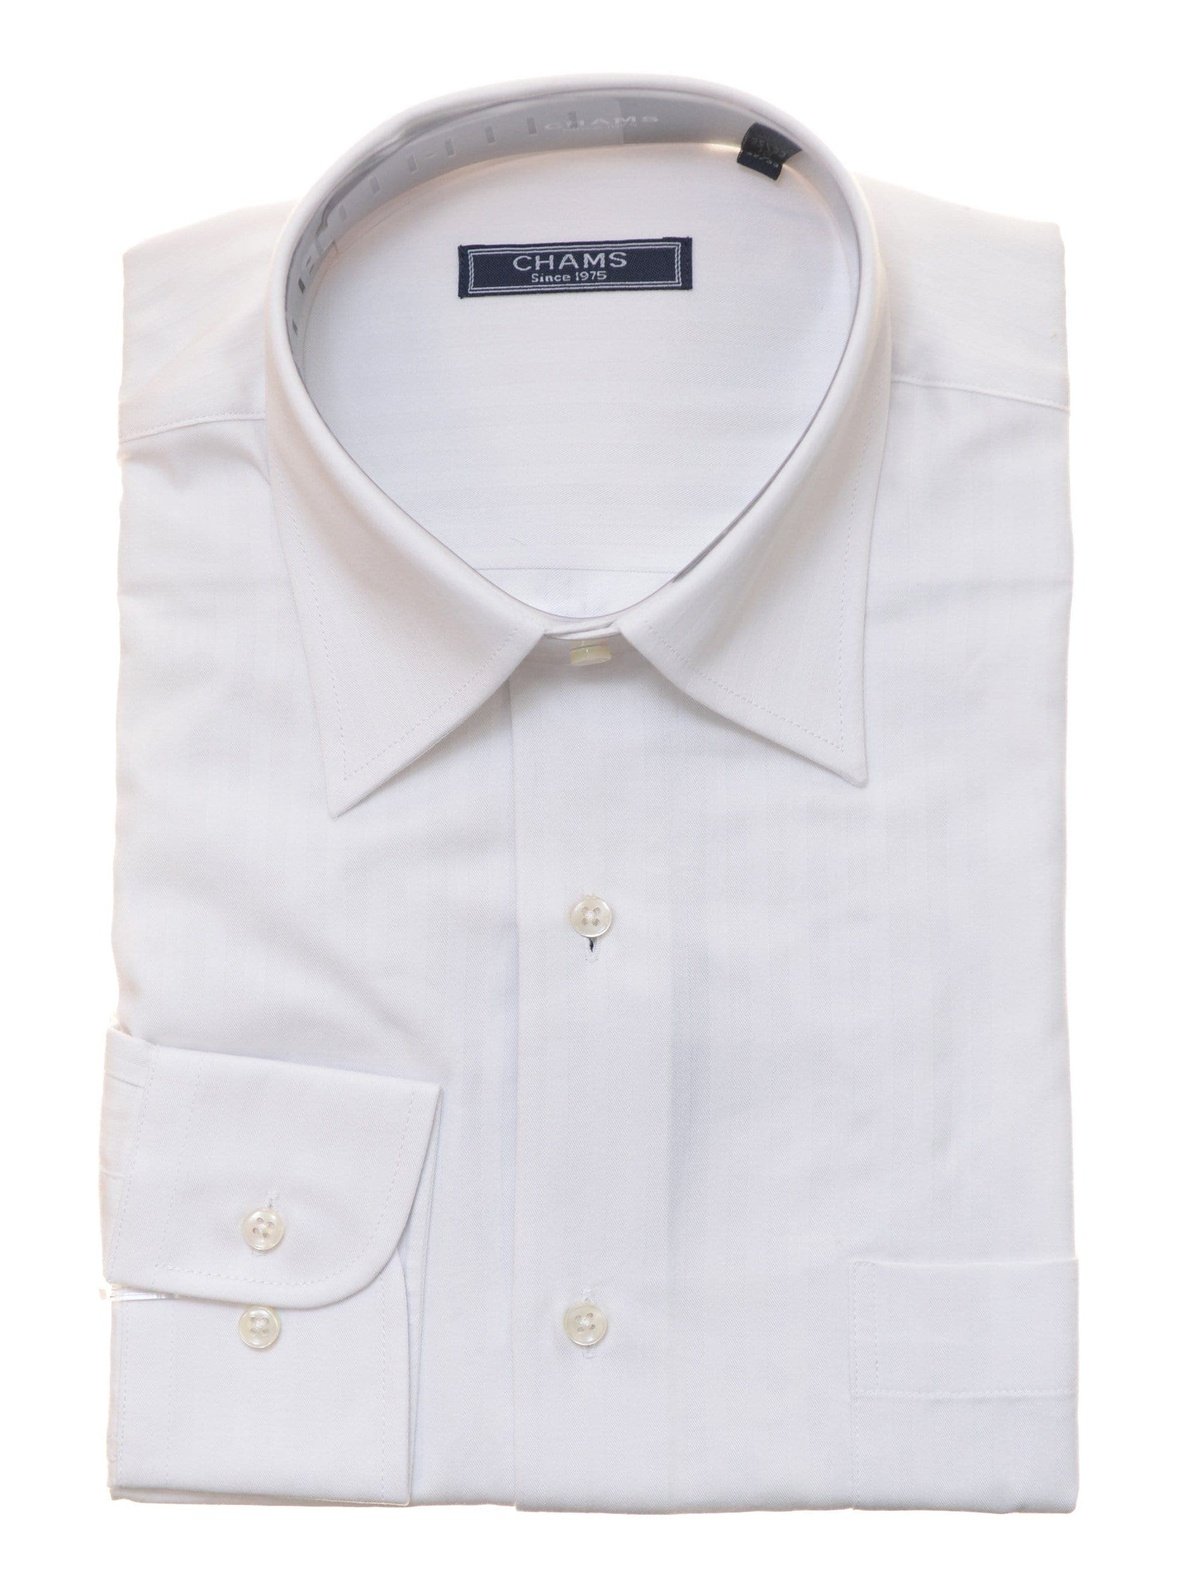 Chams SHIRTS Chams Classic Fit White Tonal Striped Fine Combed Cotton Dress Shirt